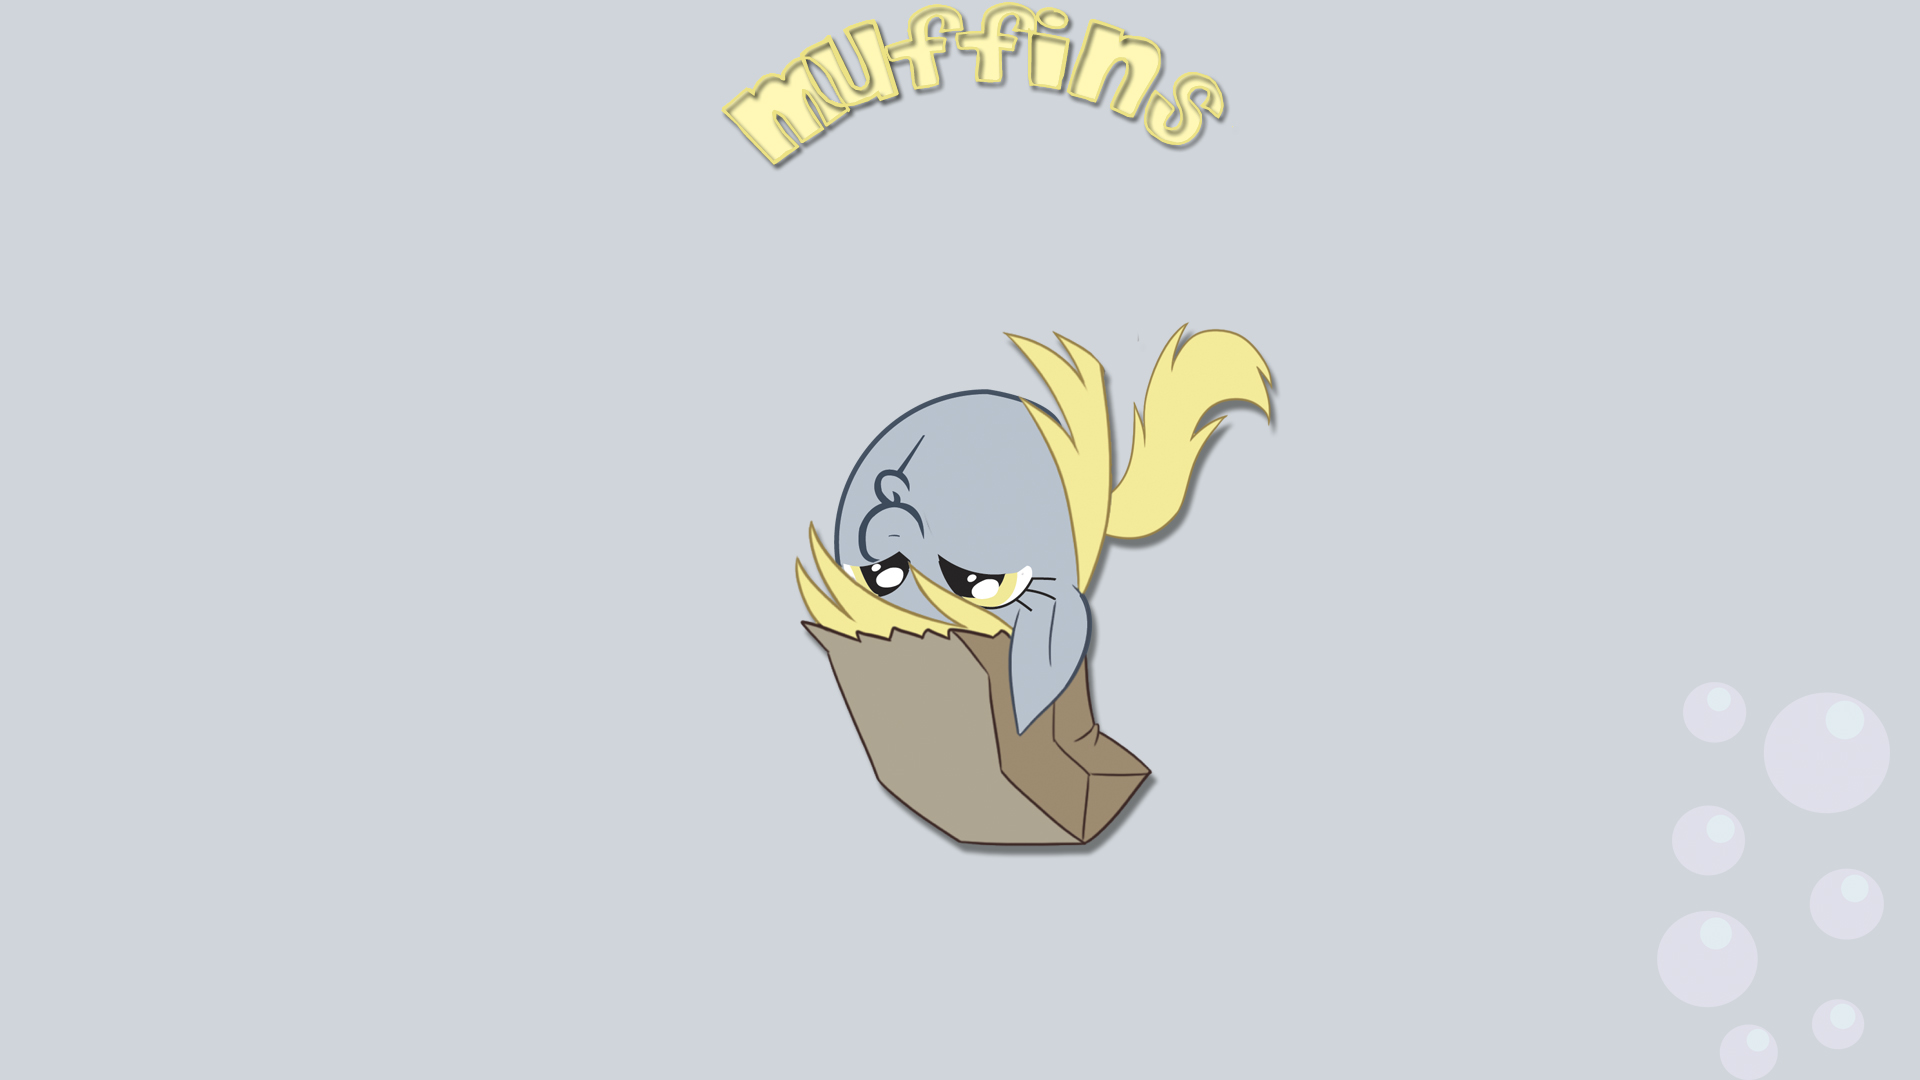 Derpy Hooves by Fruhand